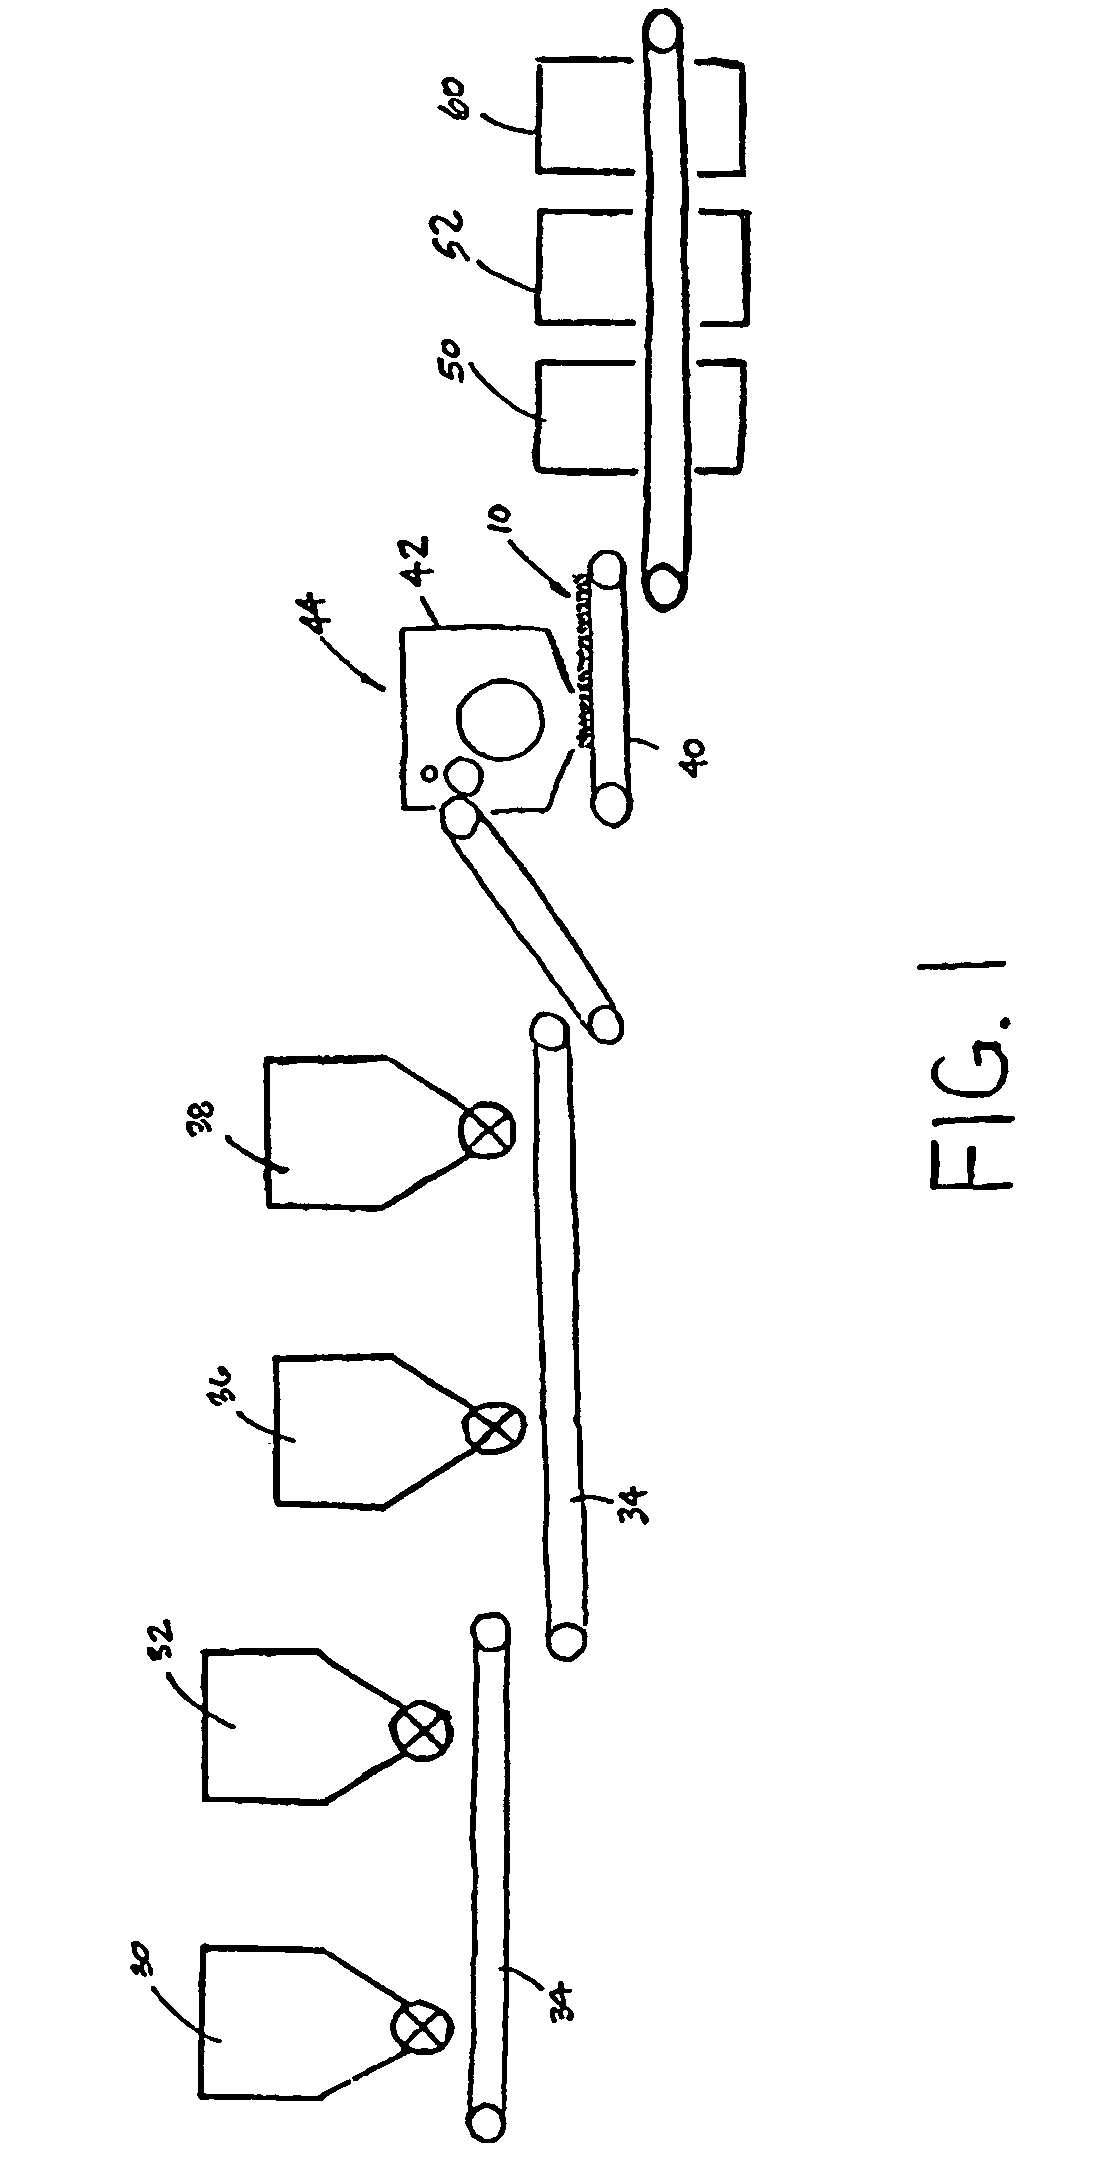 Sound absorbing material and process for making